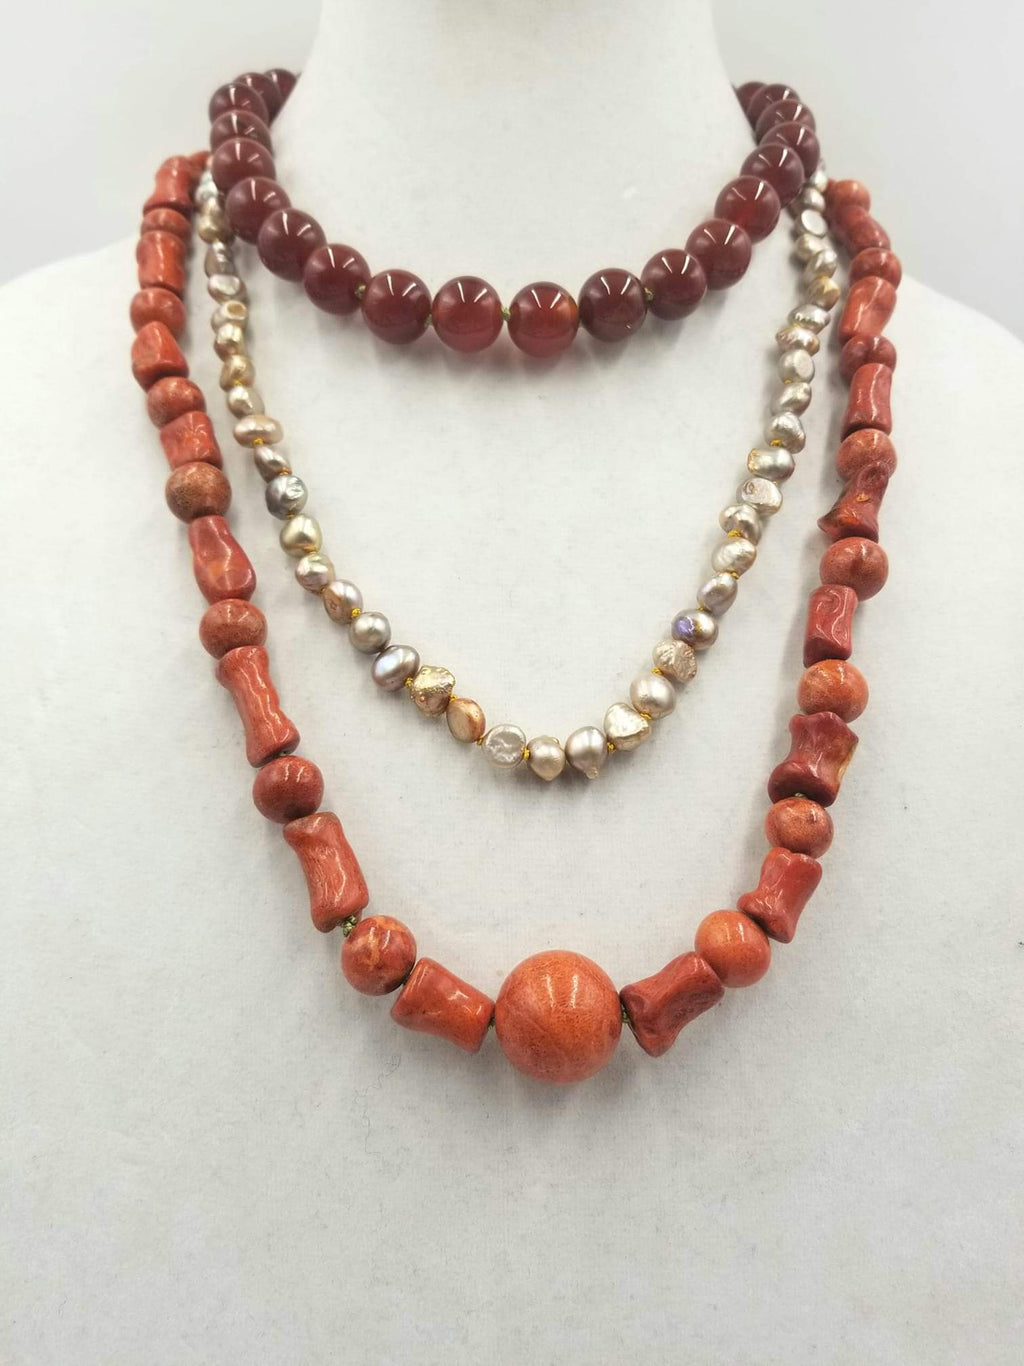 "Etna's Descendants" A 3-strand, sponge coral, pearl, carnelian necklace  with Sterling Silver accents & clasp. At Angst Art Gallery, Vancouver, WA